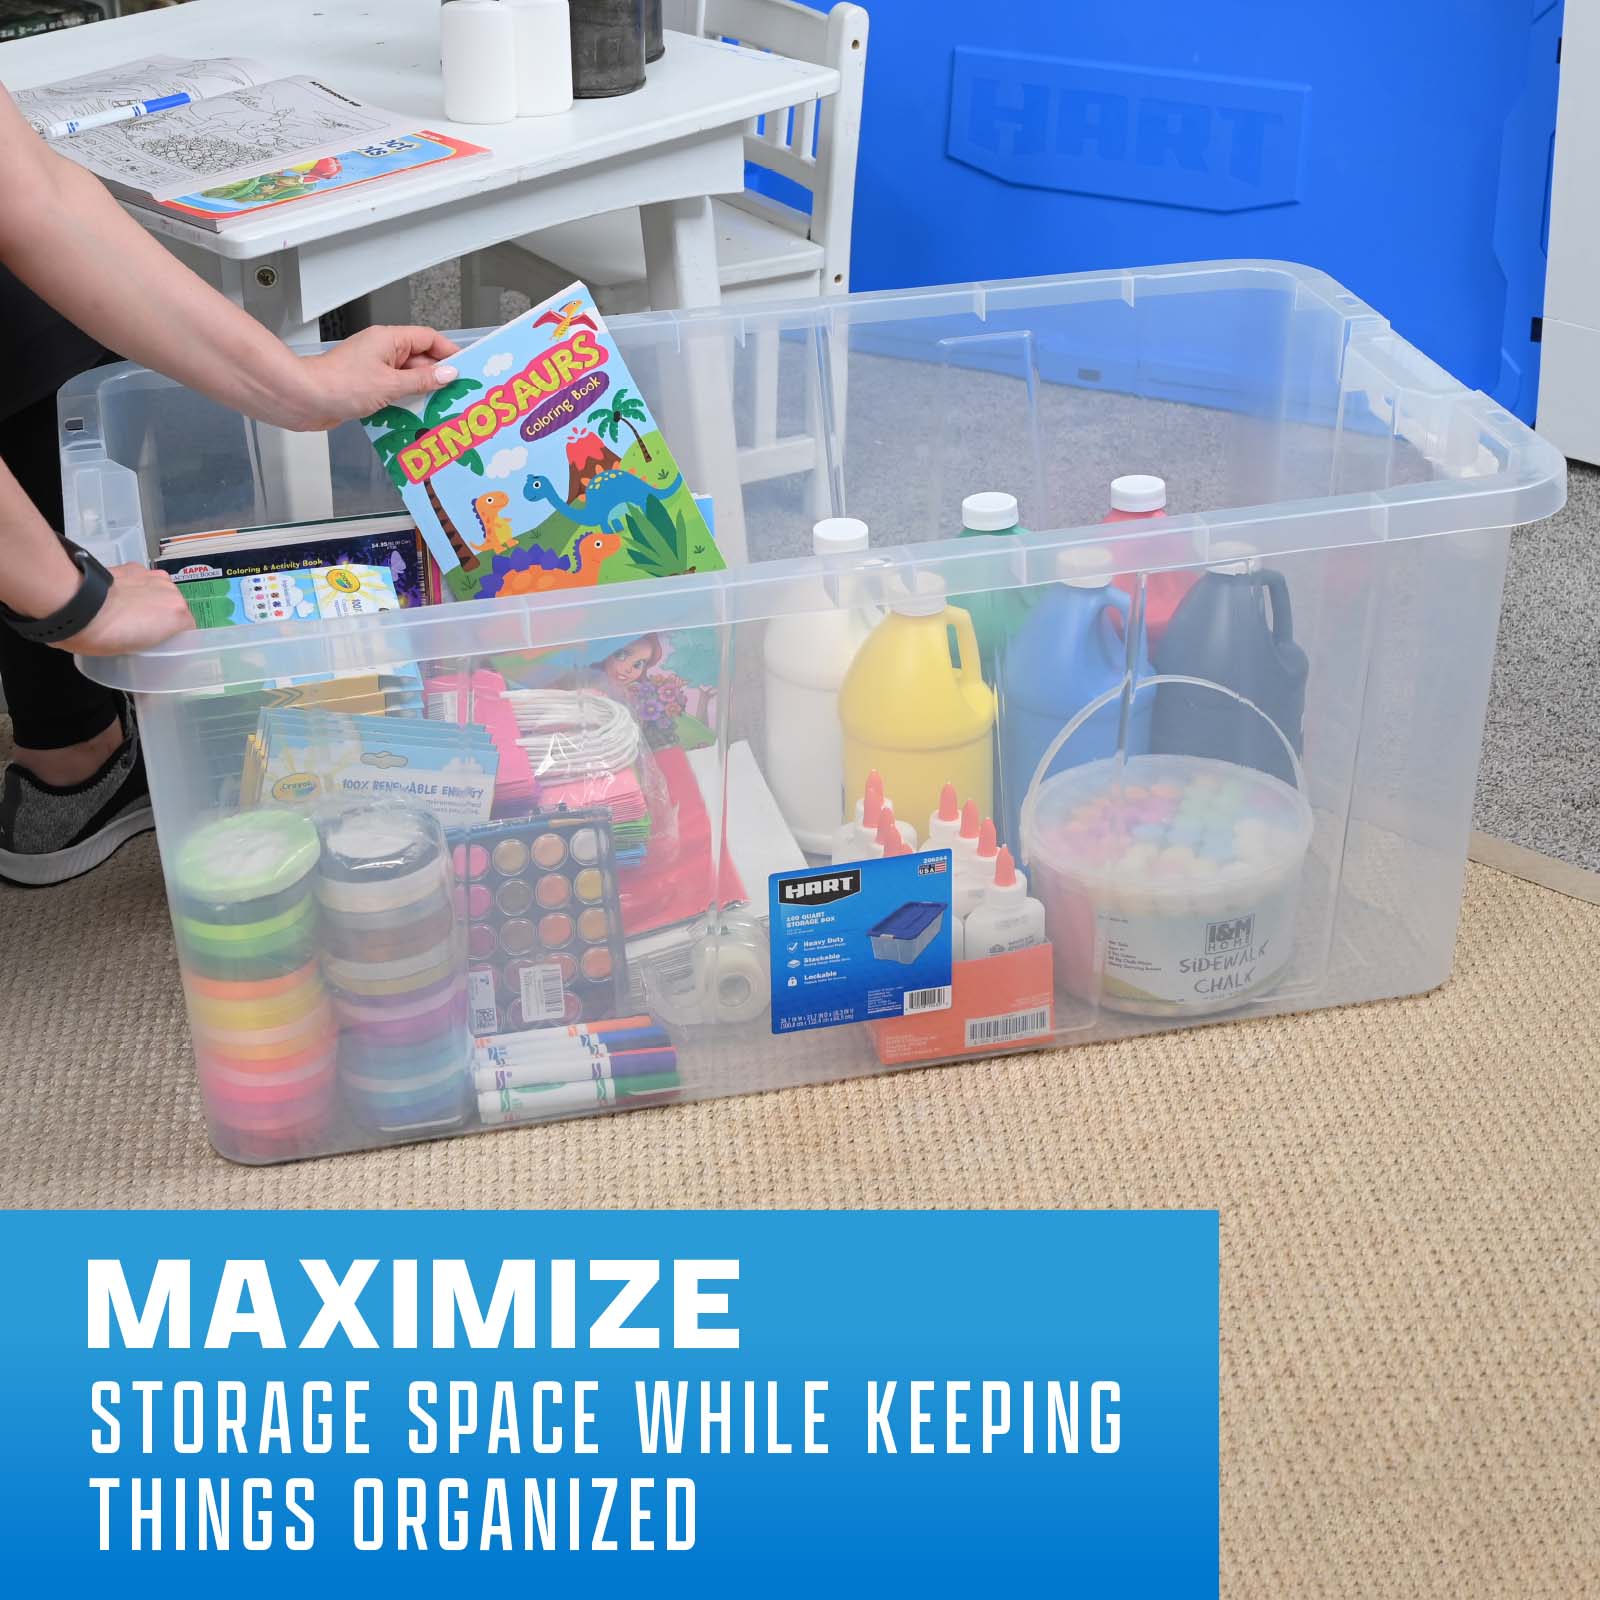 Maximize storage space while keeping things organized